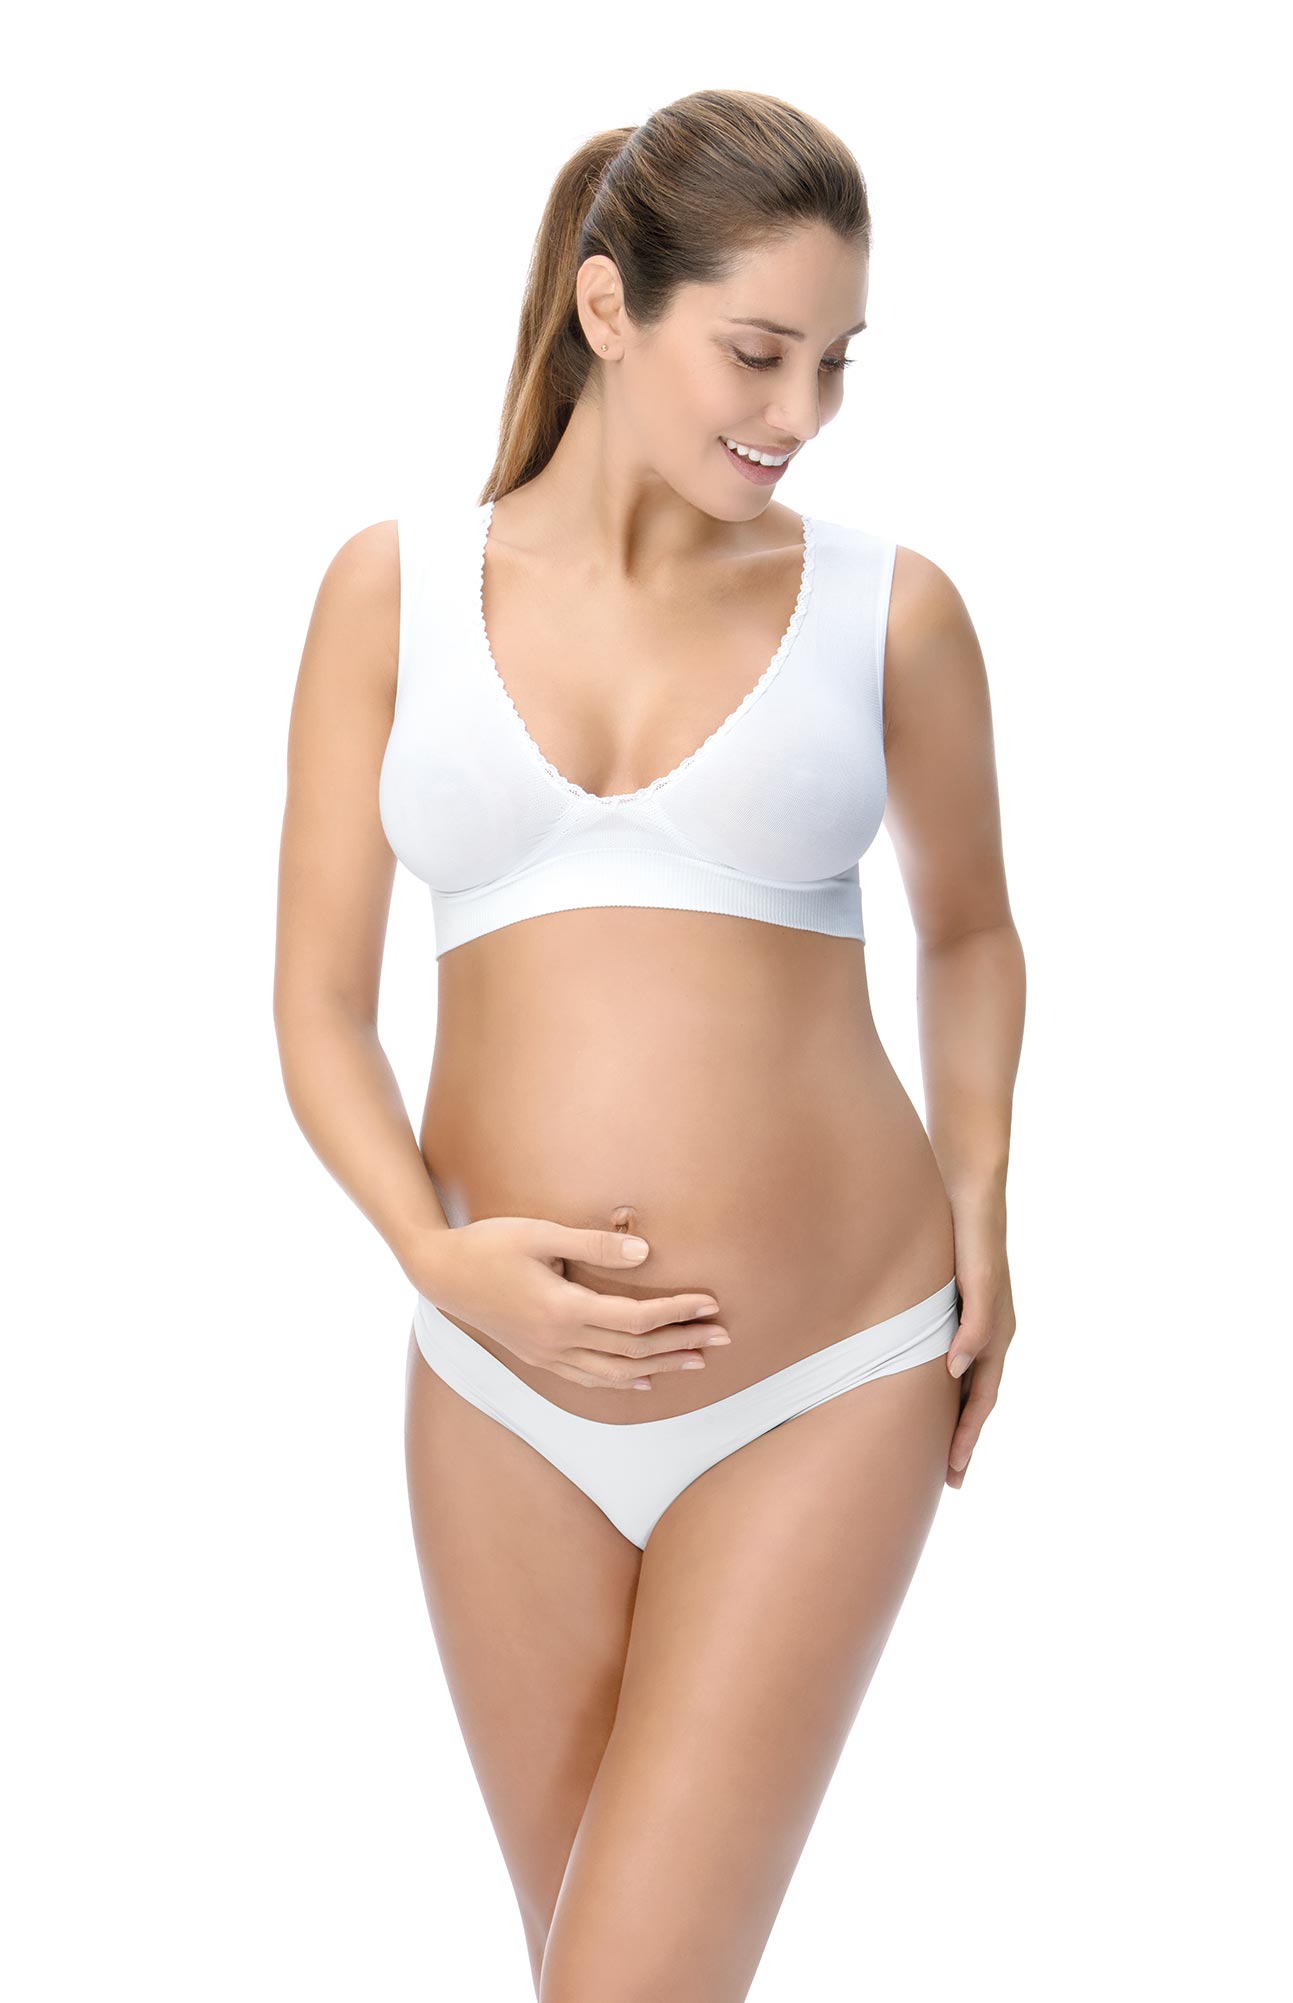 KUNINDOME Maternity Shapewear for Belly Support, Prevent Thigh